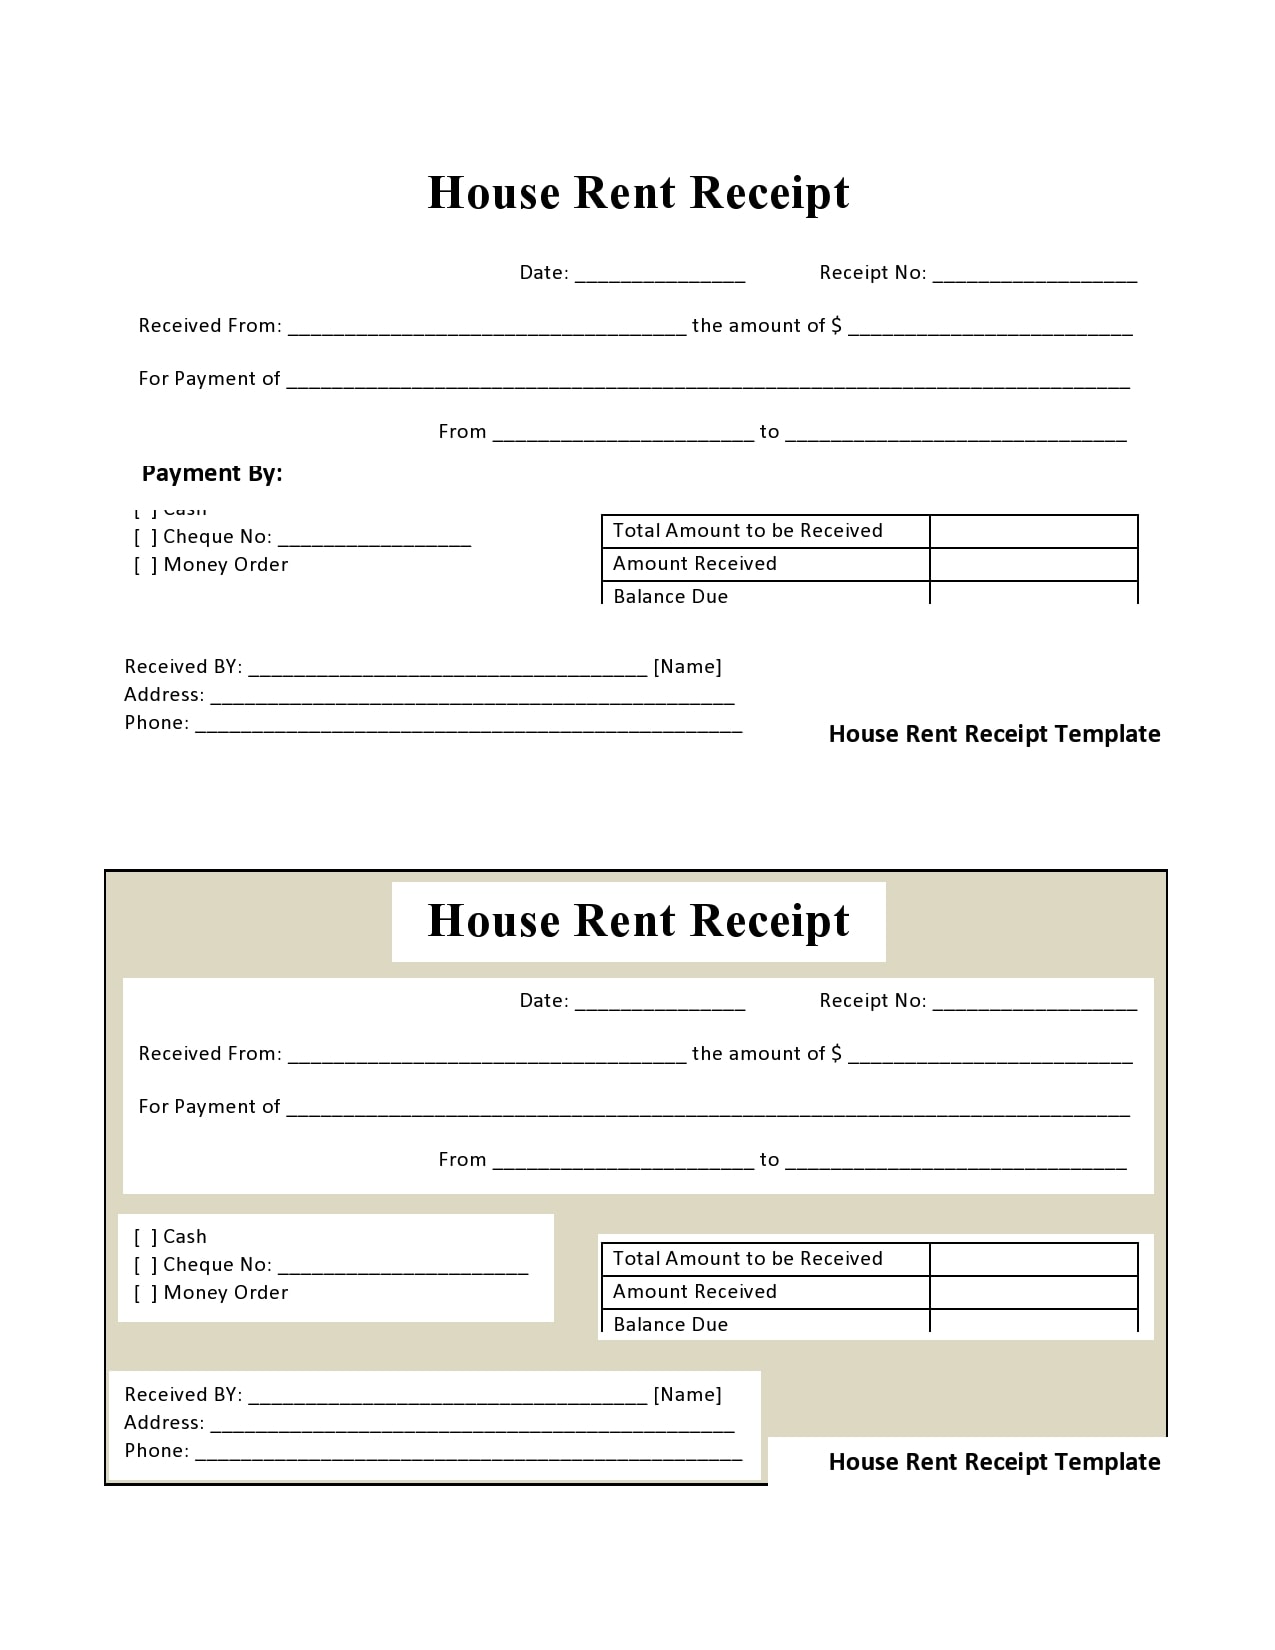 rent receipt for income tax ontario template